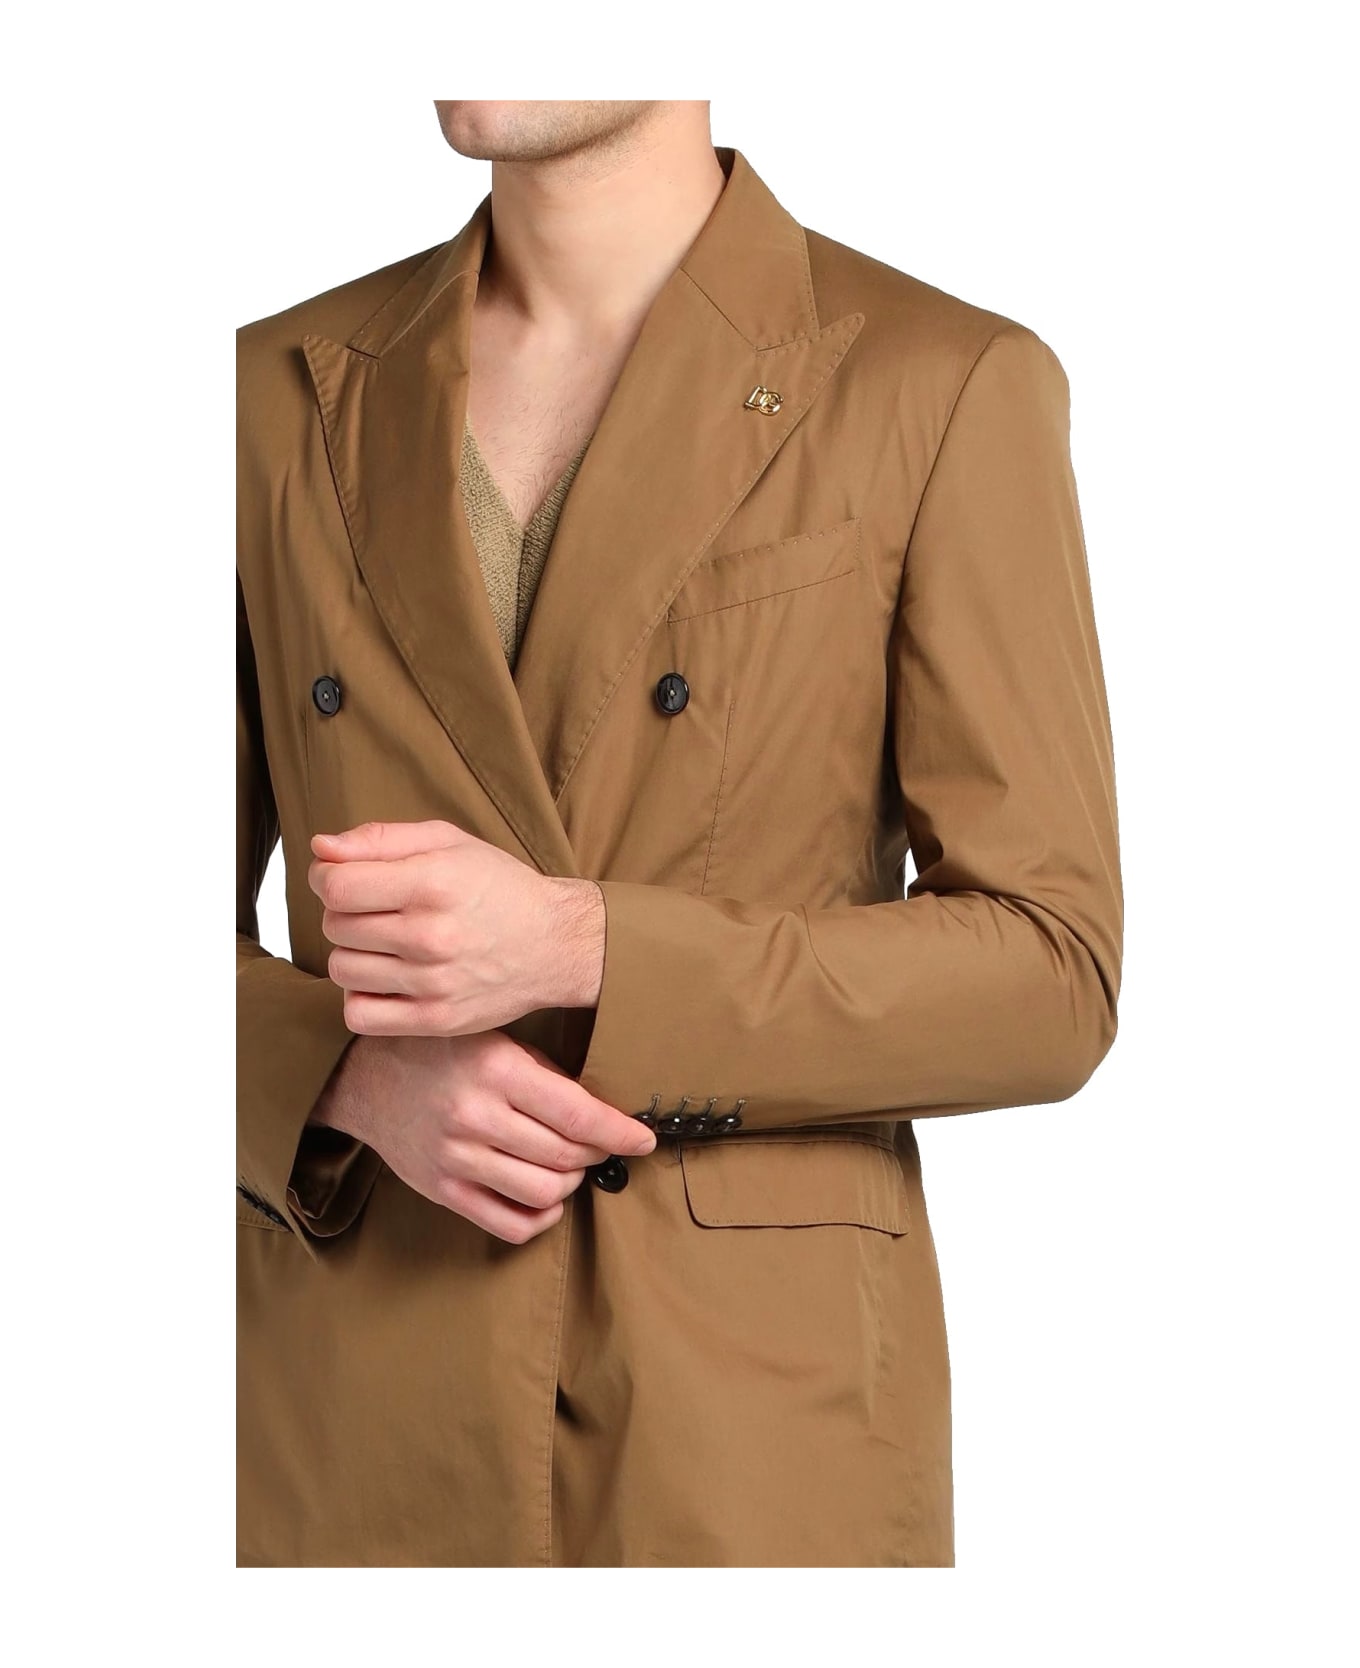 Dolce & Gabbana Double-breasted Suit - Brown